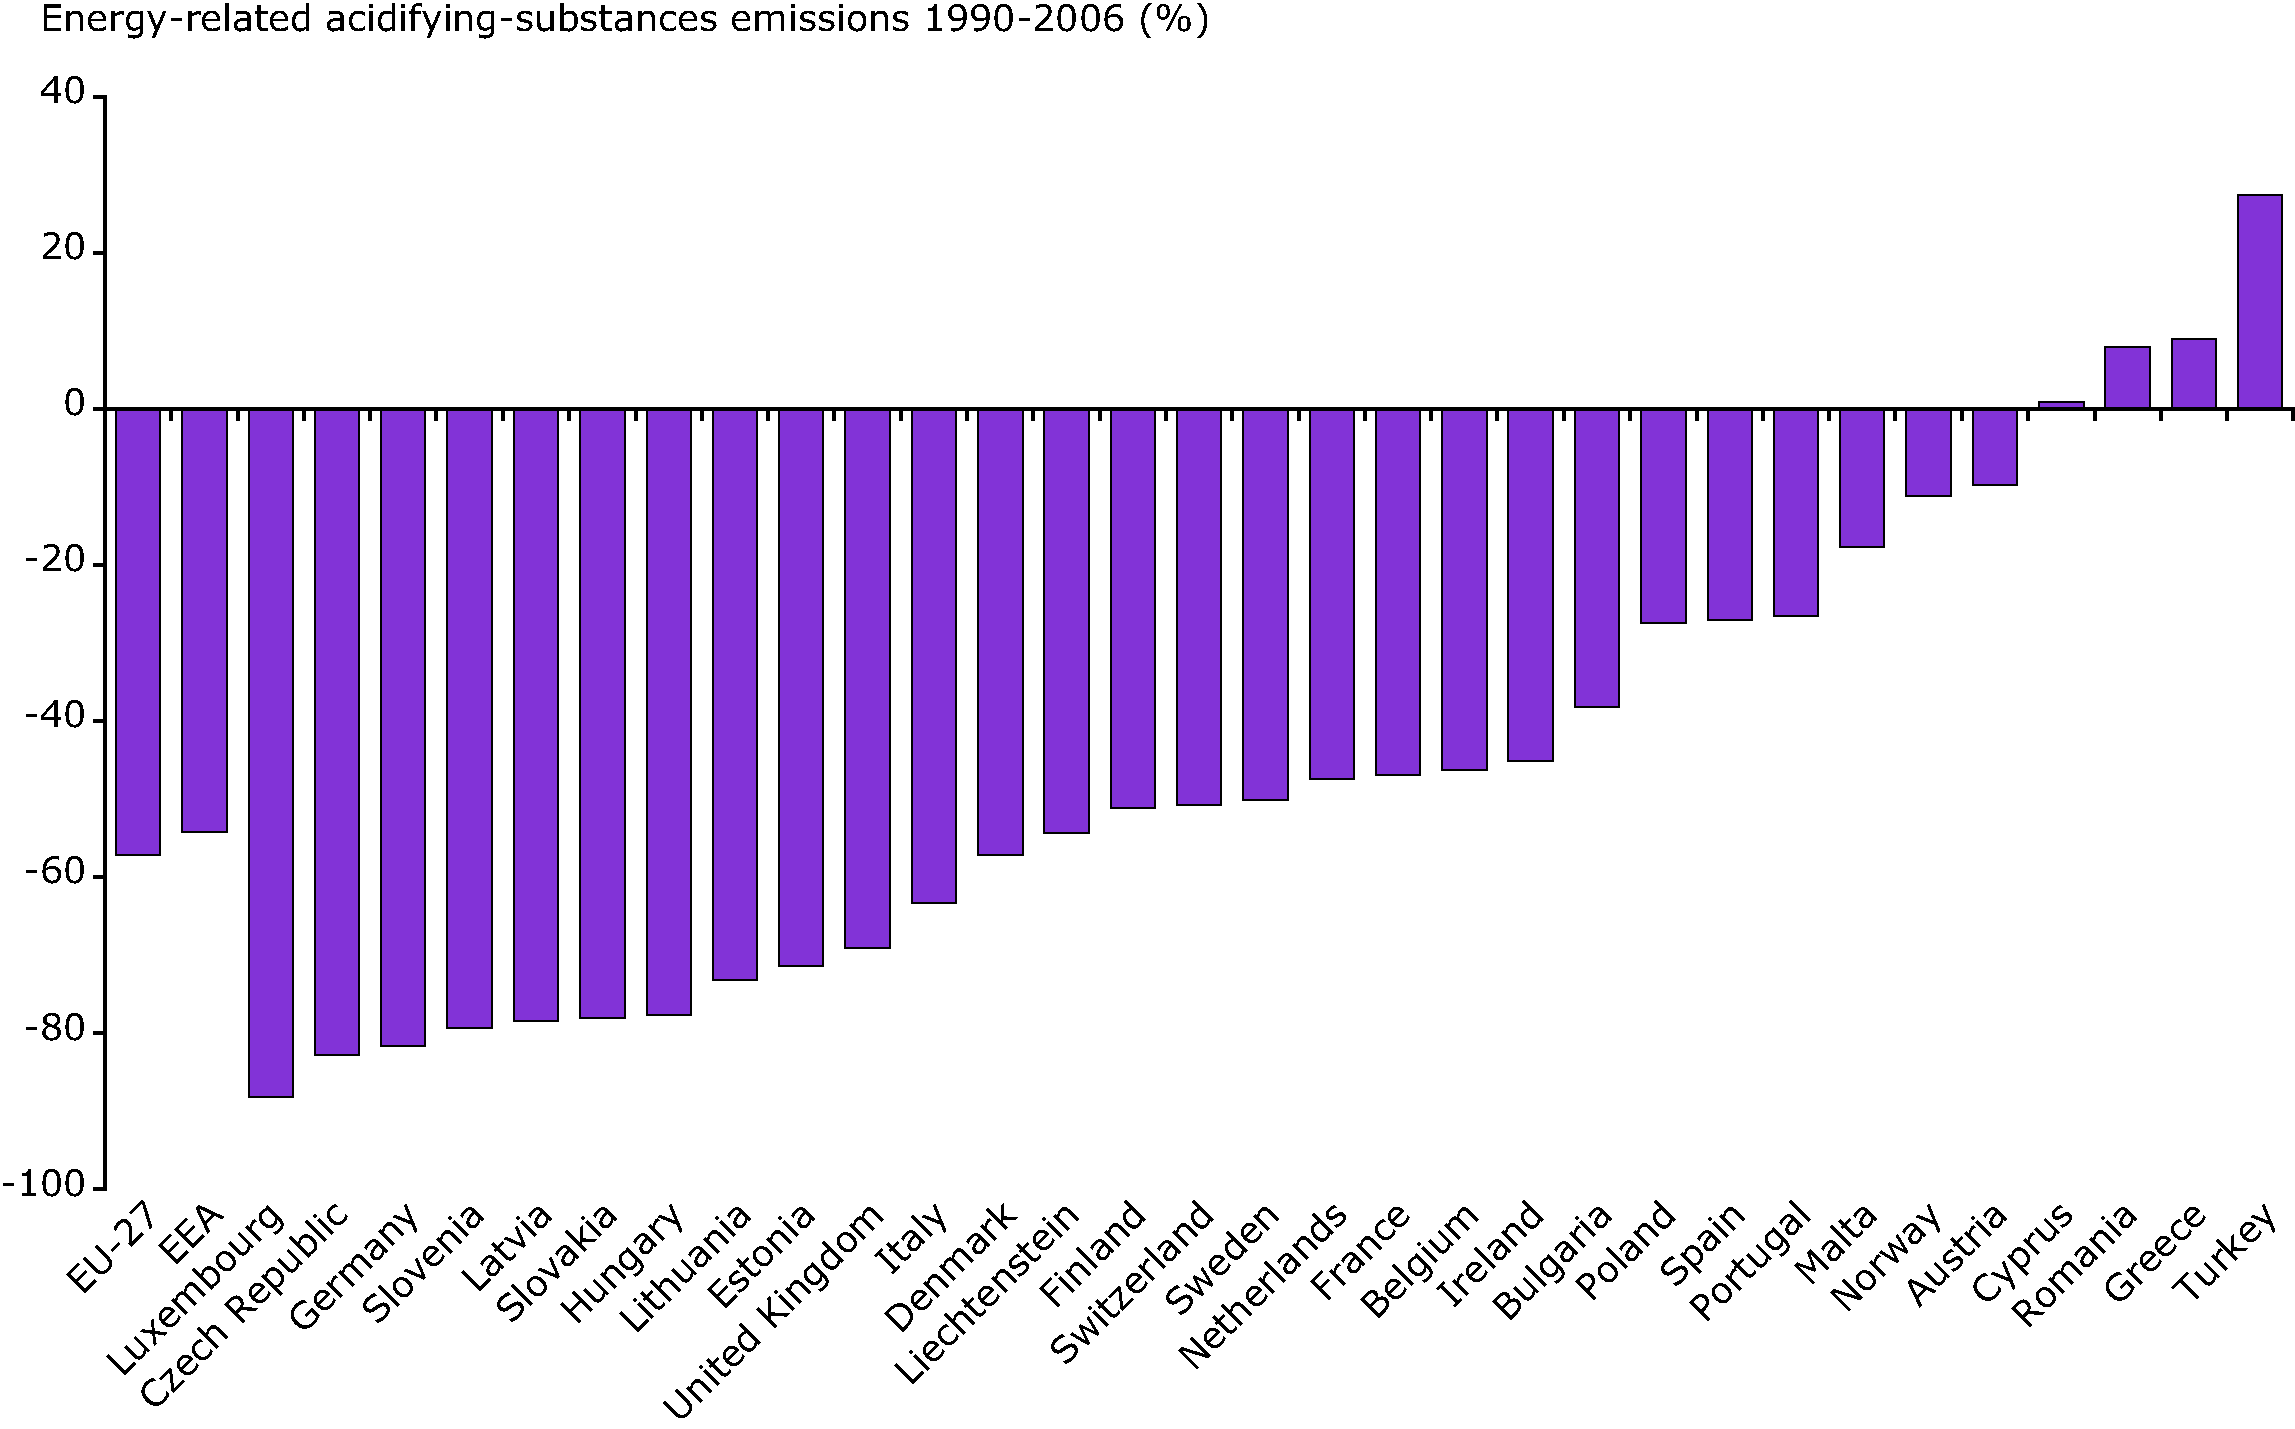 Overall change in emissions of acidifying substances by country, 1990-2006